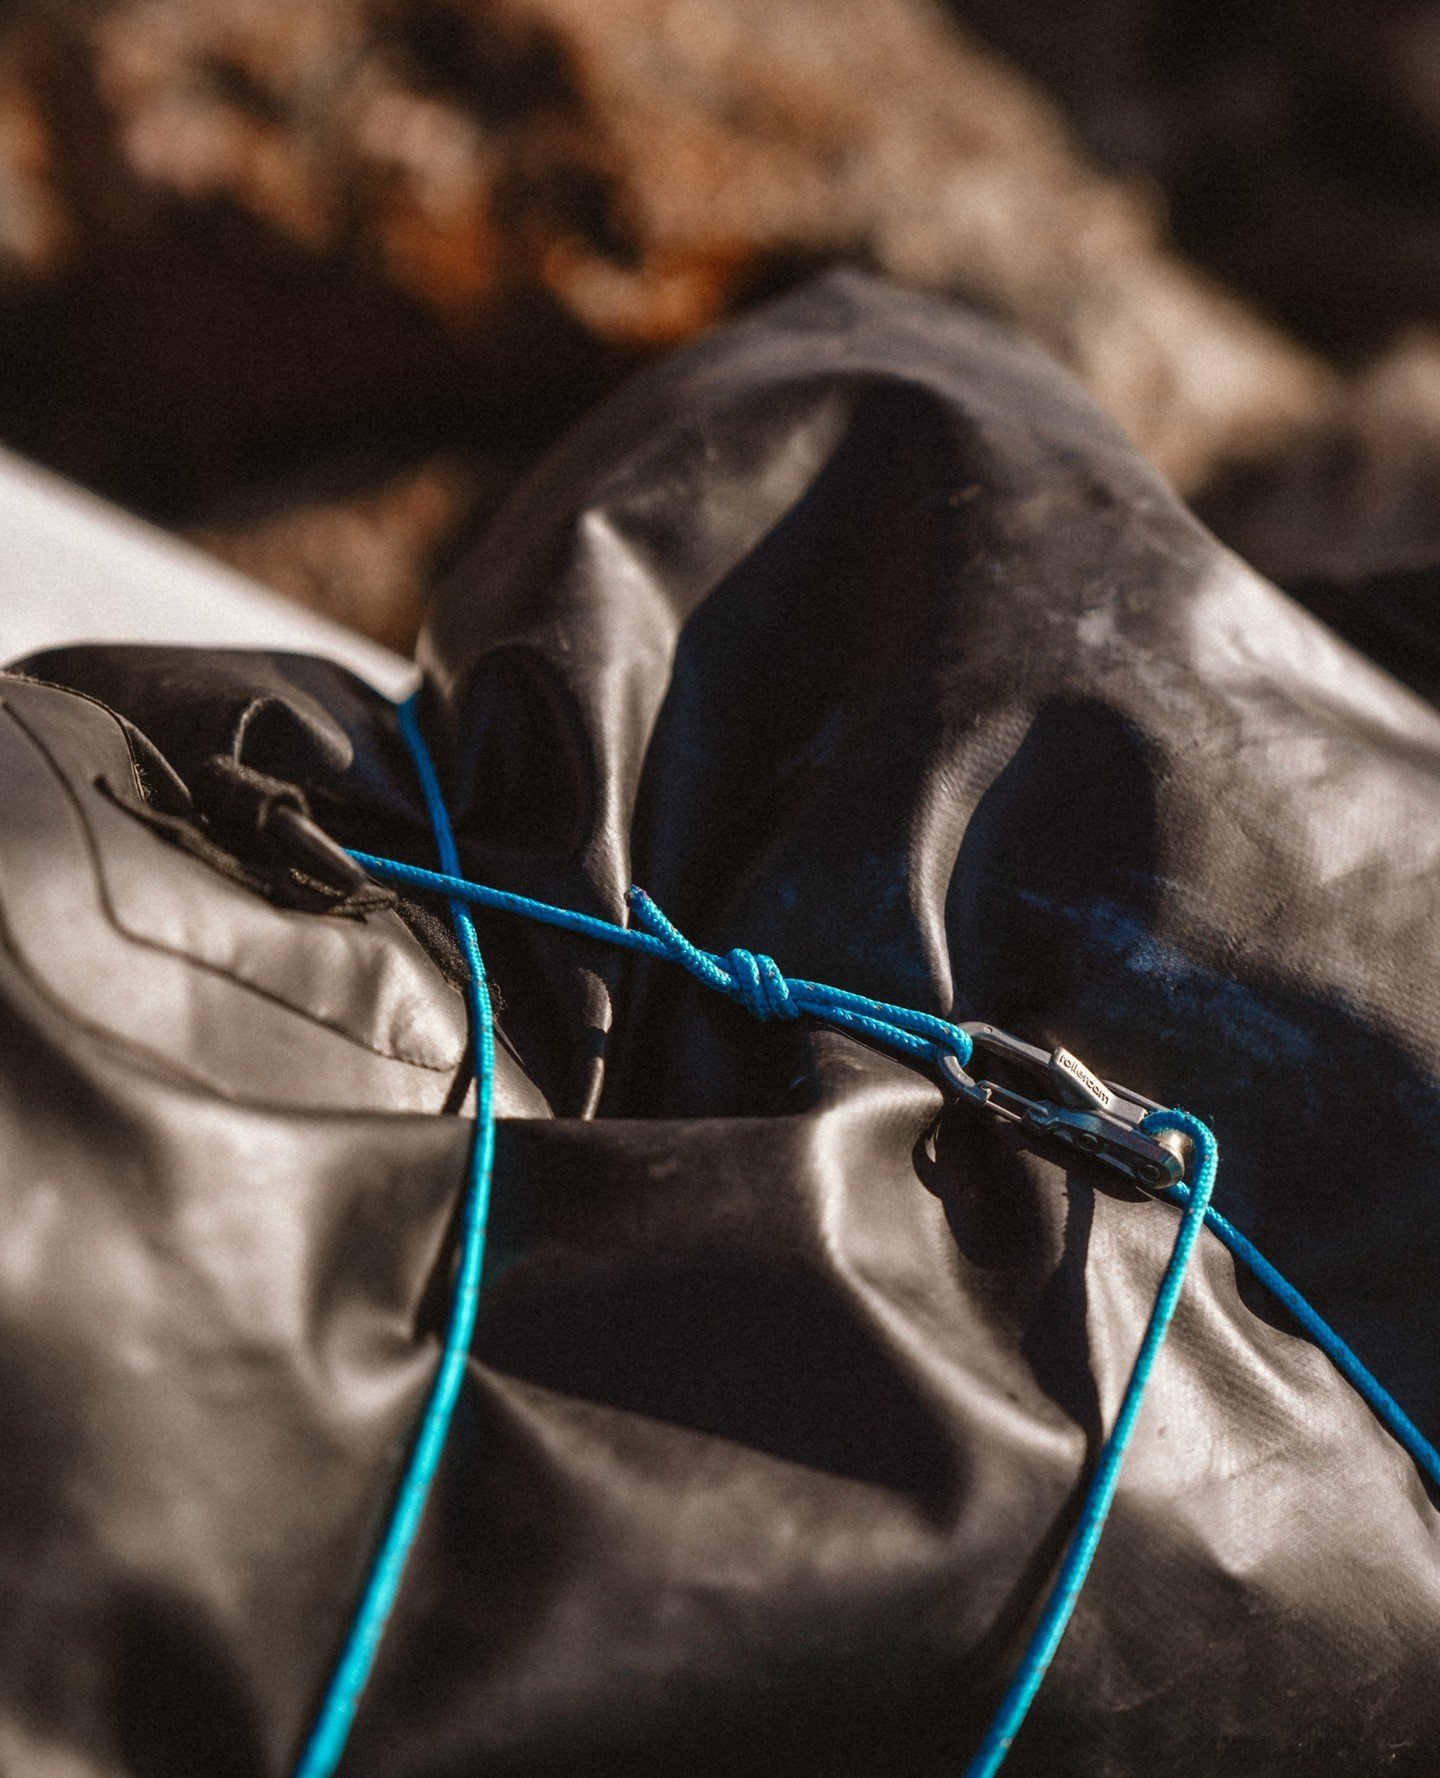 Keeping your dry bag secure is critical when you're on the river. Don't risk tie-downs that require you to release the cinch in order to access your gear fully.⁠
⁠
Just loosen the Roperoller as much as you need, and then cinch back up with a gentle p